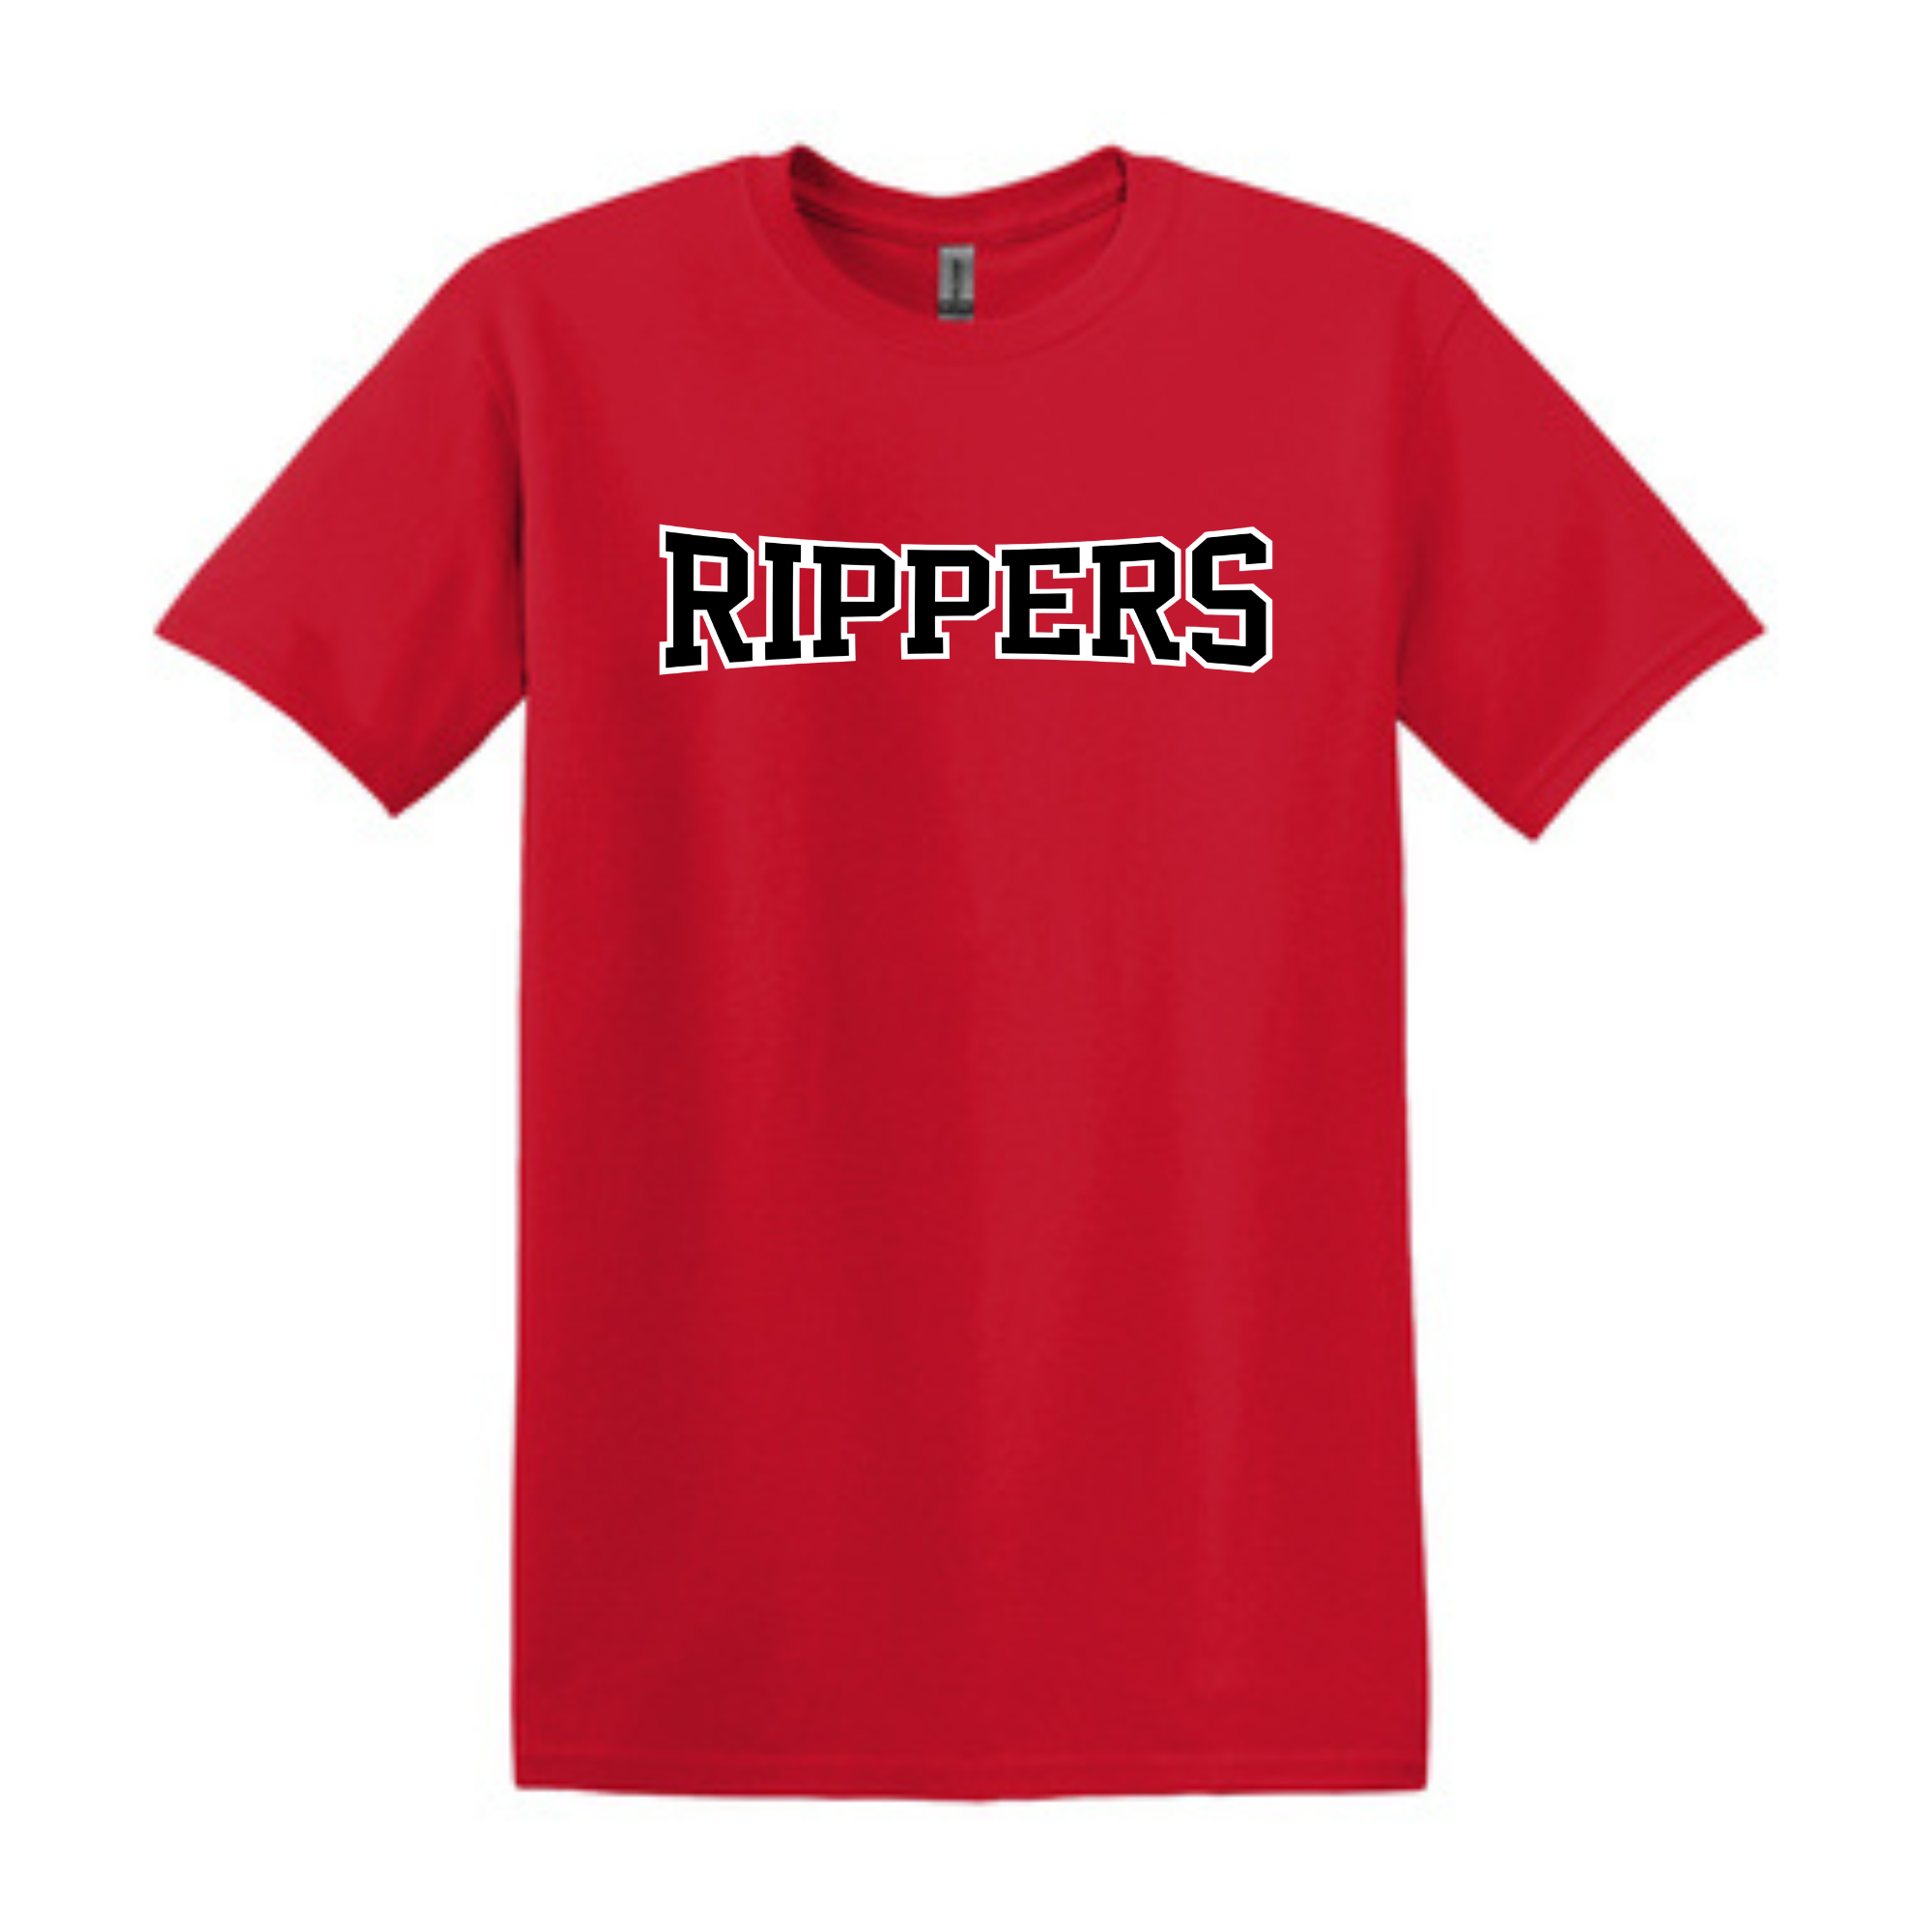 Rippers Tee- 64000